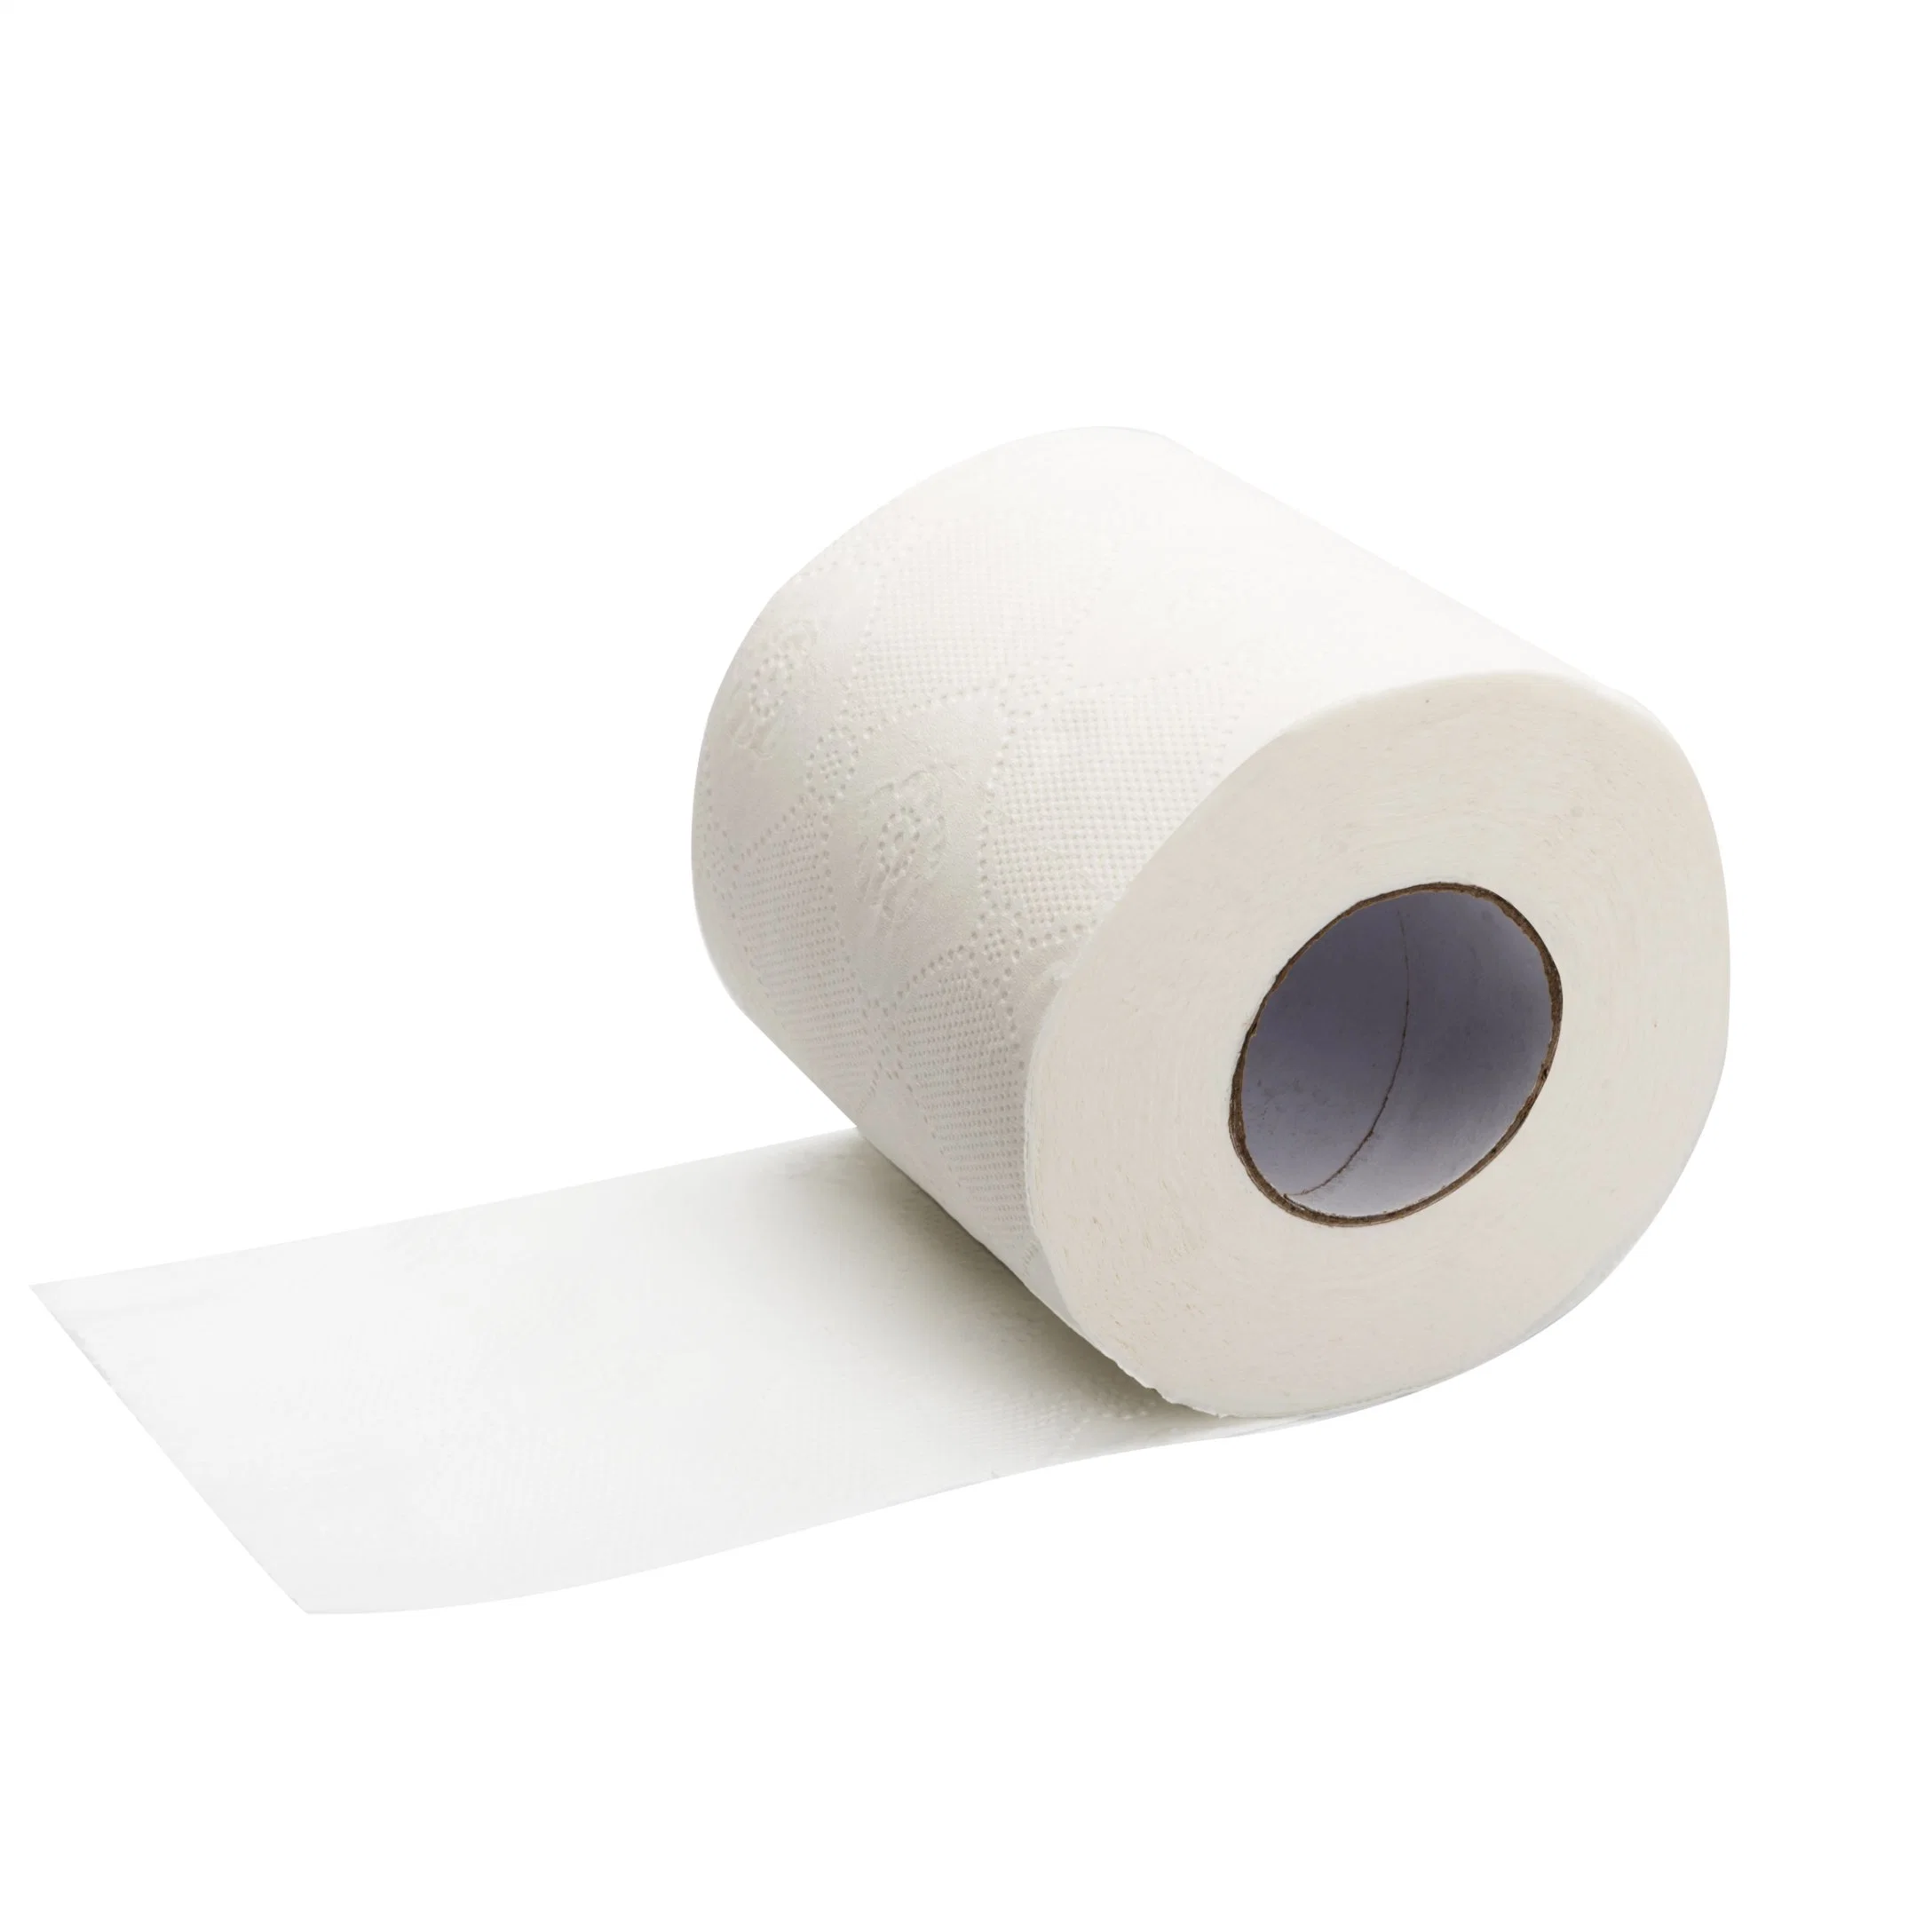 Toilet Tissue Paper Roll with Virgin Material